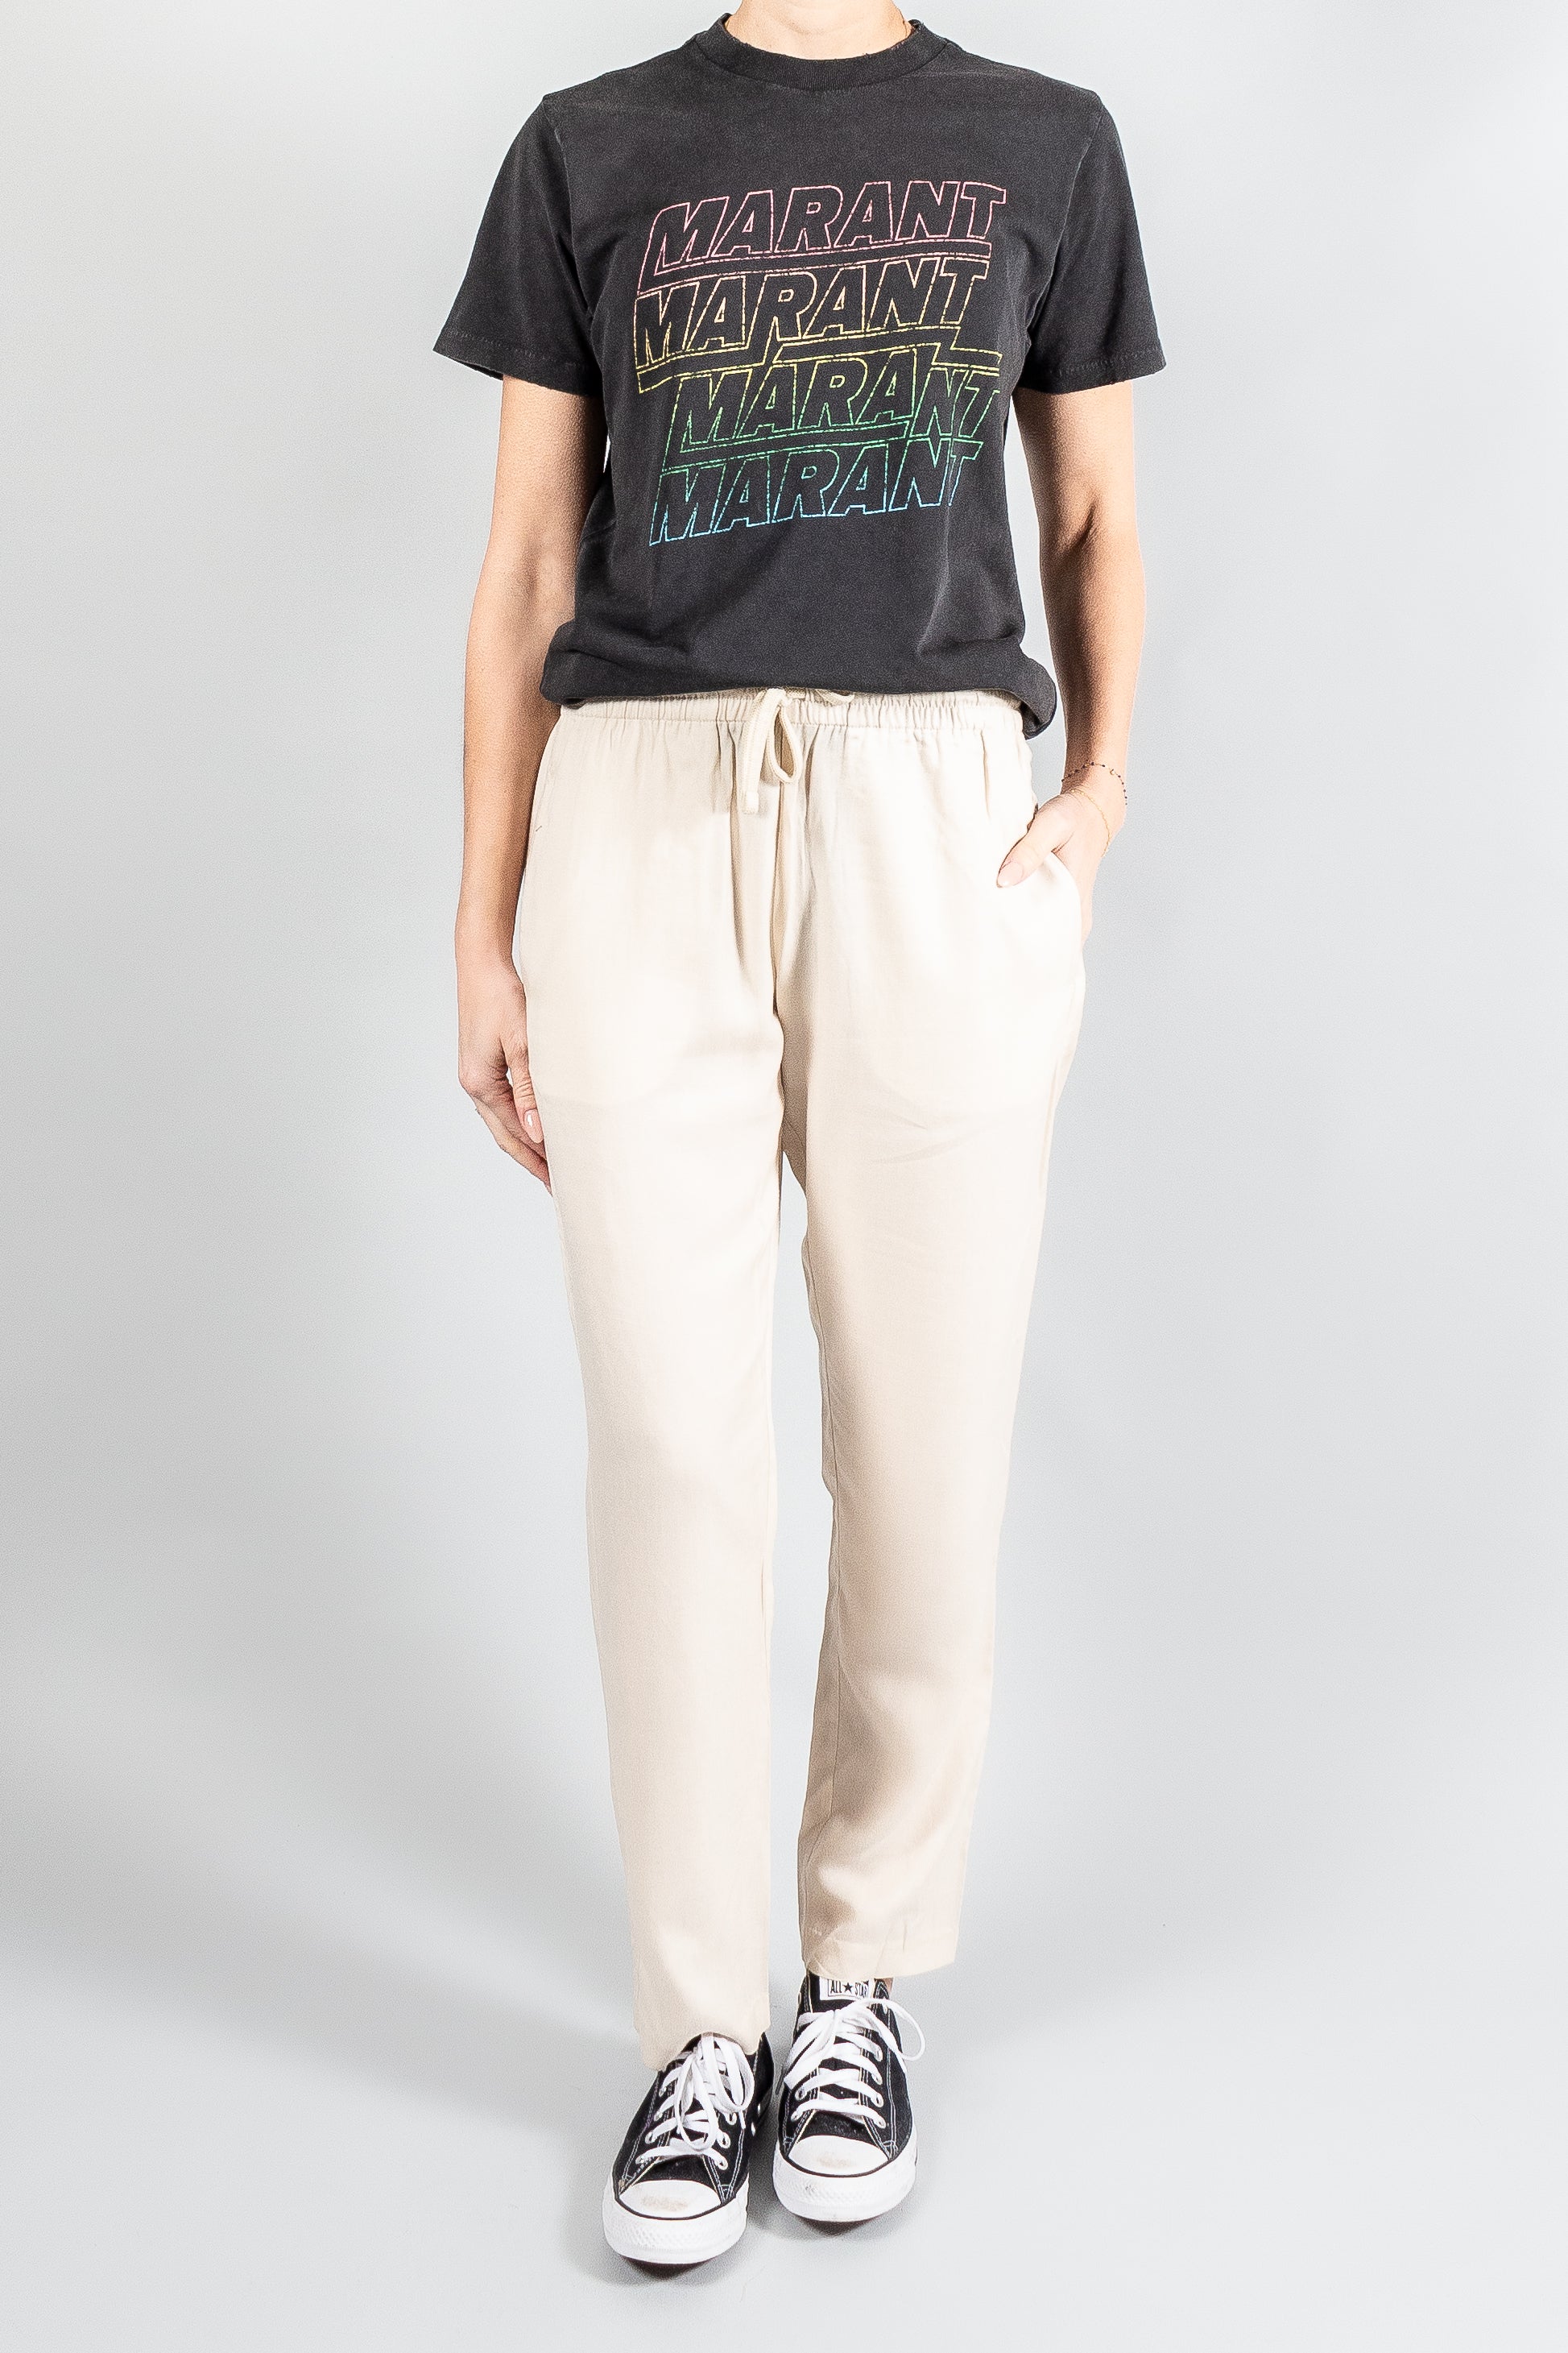 Isabel Marant Etoile Berati Pants-Pants and Shorts-Misch-Boutique-Vancouver-Canada-misch.ca